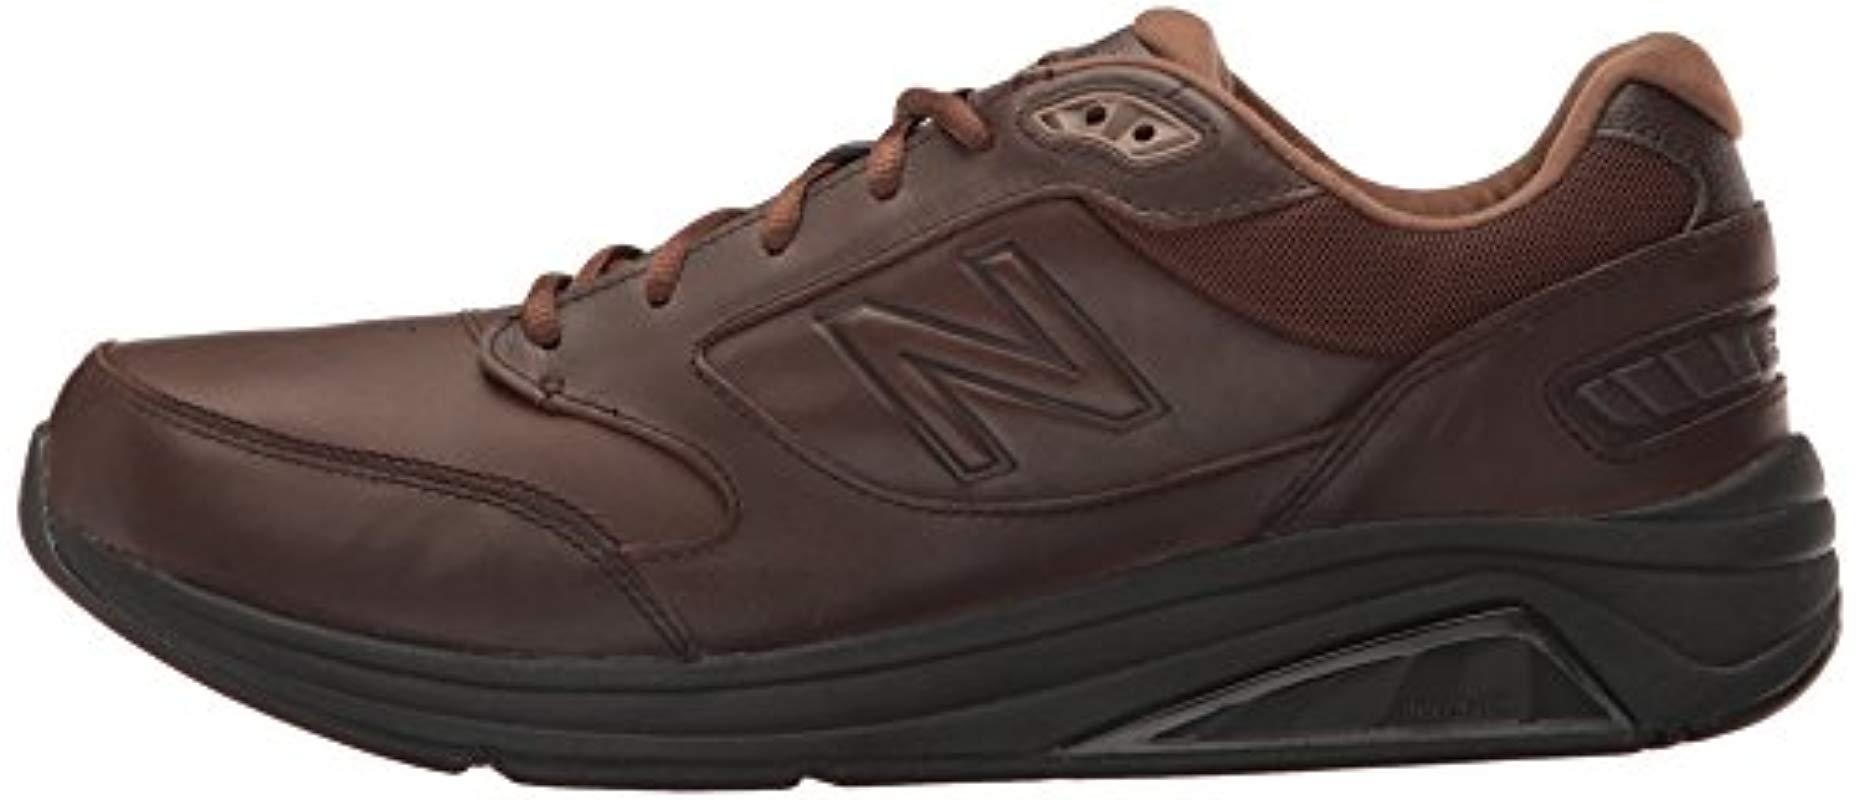 New Balance Leather 928 Low Rise Hiking Boots in Brown for Men - Lyst